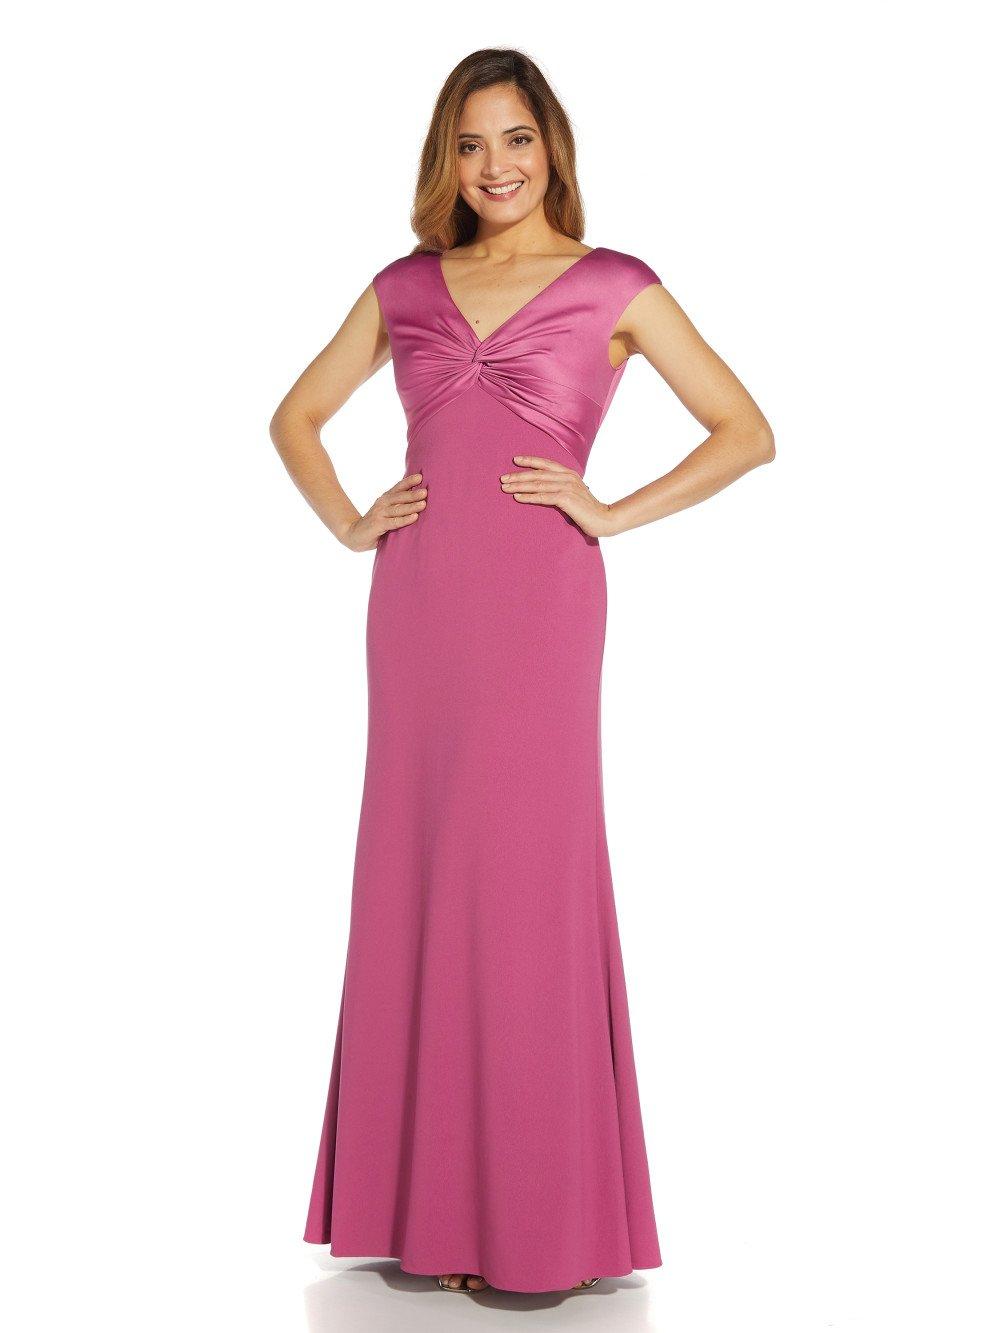 Satin Crepe Twist Front Gown